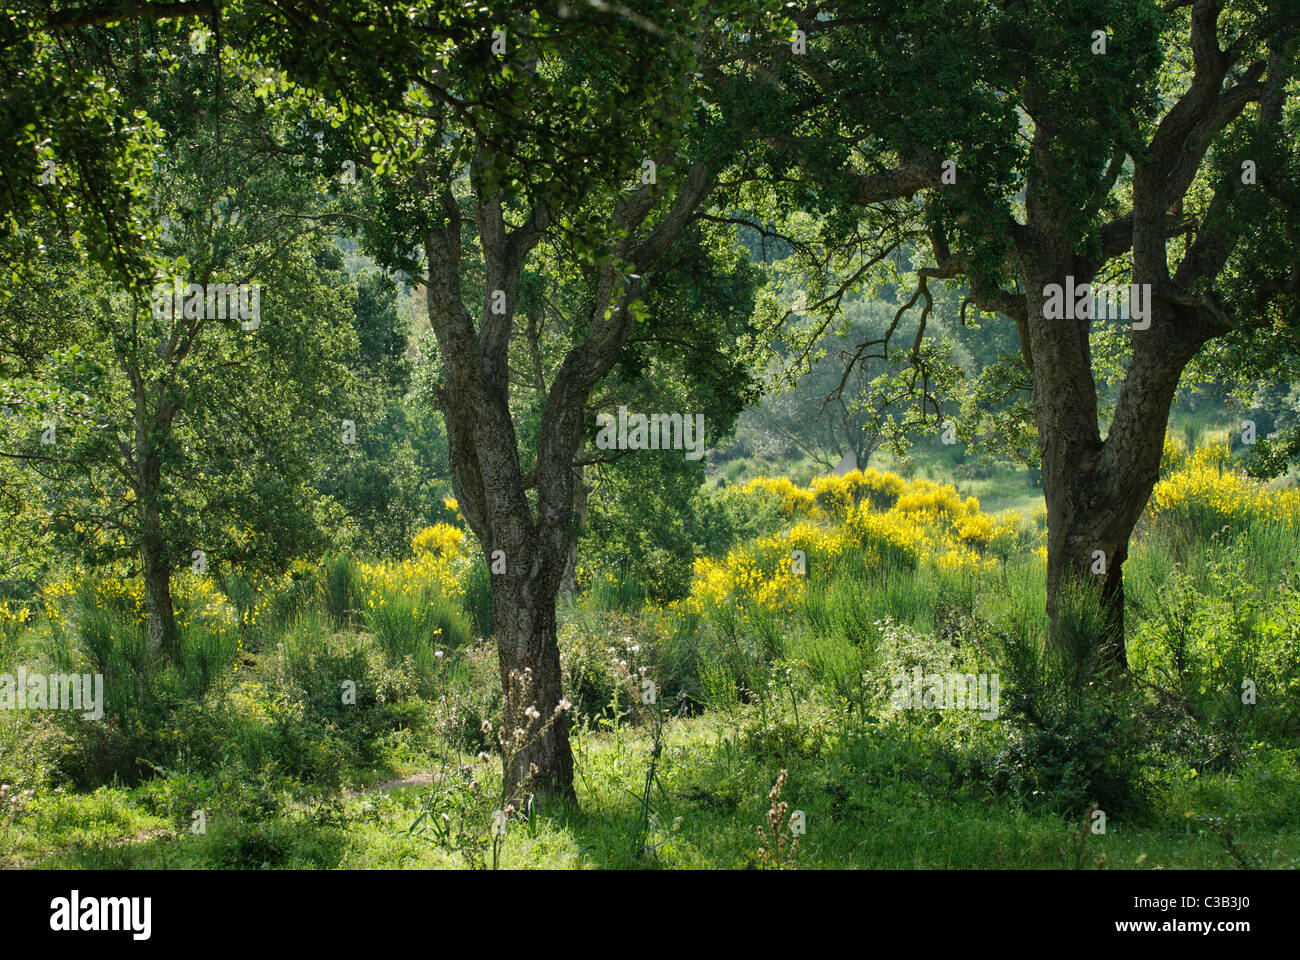 Cork Oak (Quercus suber) in maquis vegetation with flowering yellow broom, Corsica, France Stock Photo